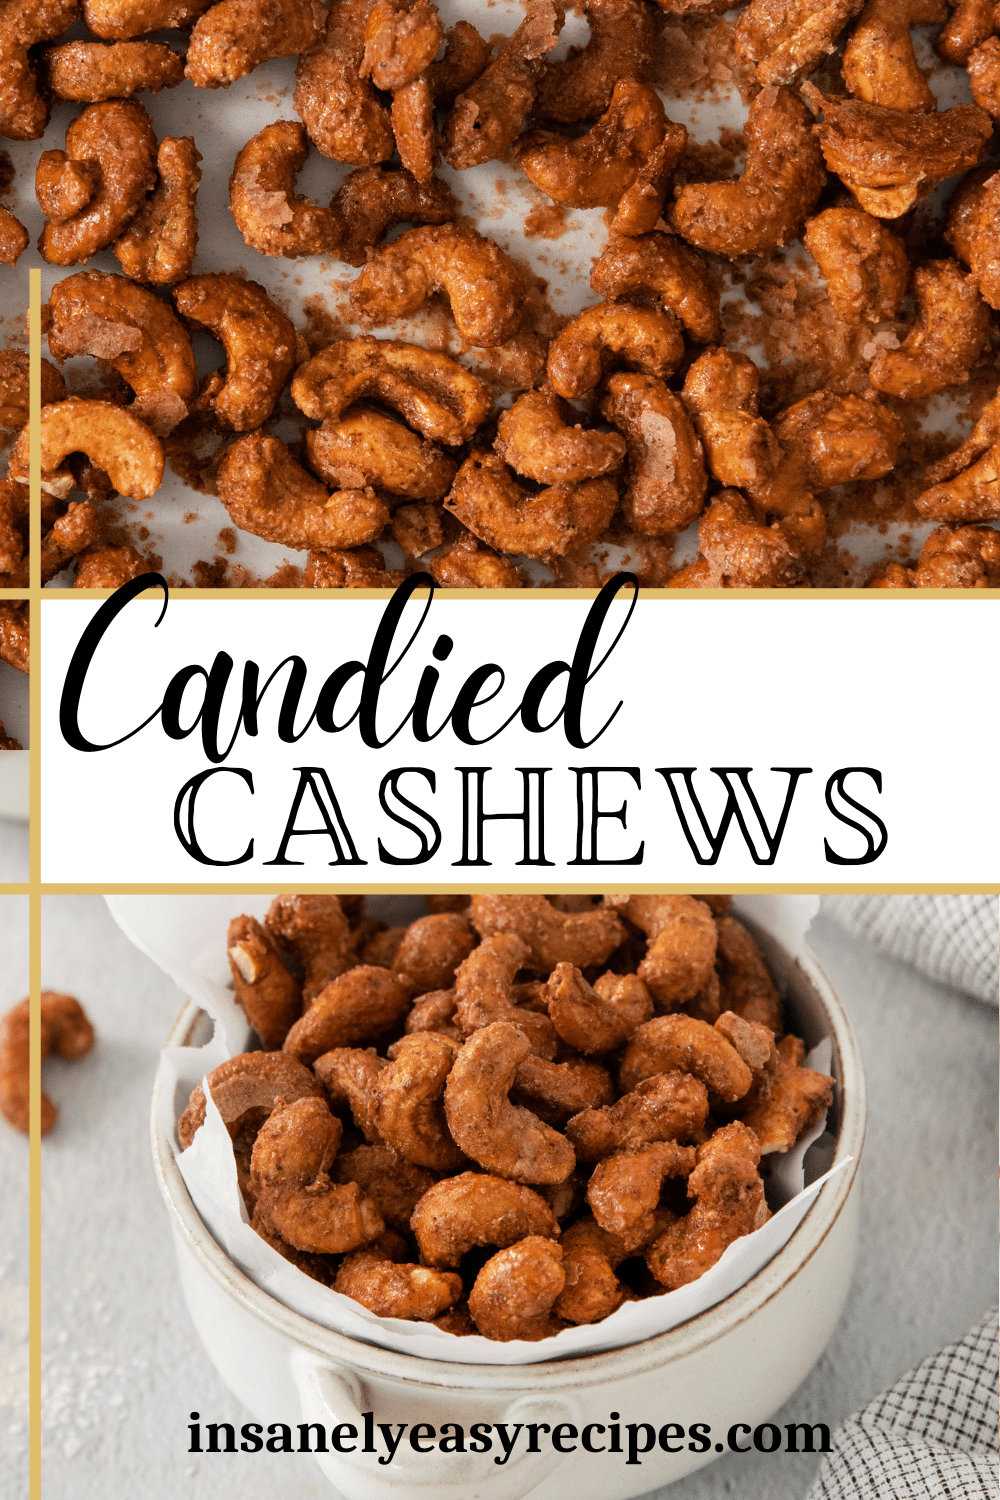 two photos of sugary cashews. Text overlay says "candied cashews"